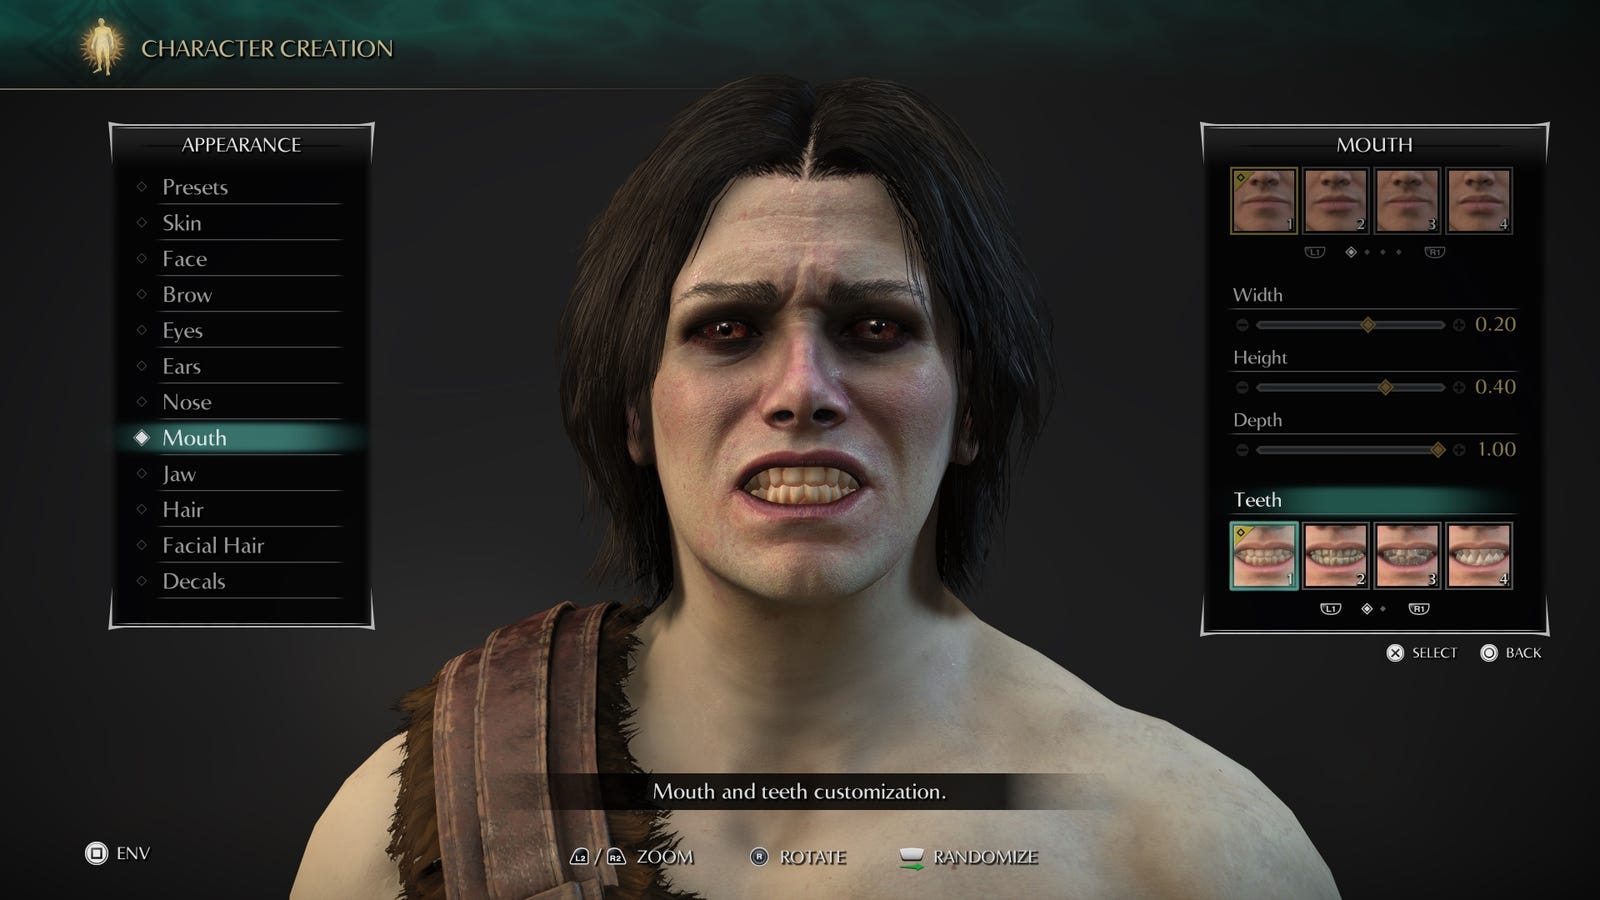 PS5 Demon's Souls Has Some Truly Fucked Up Teeth Options